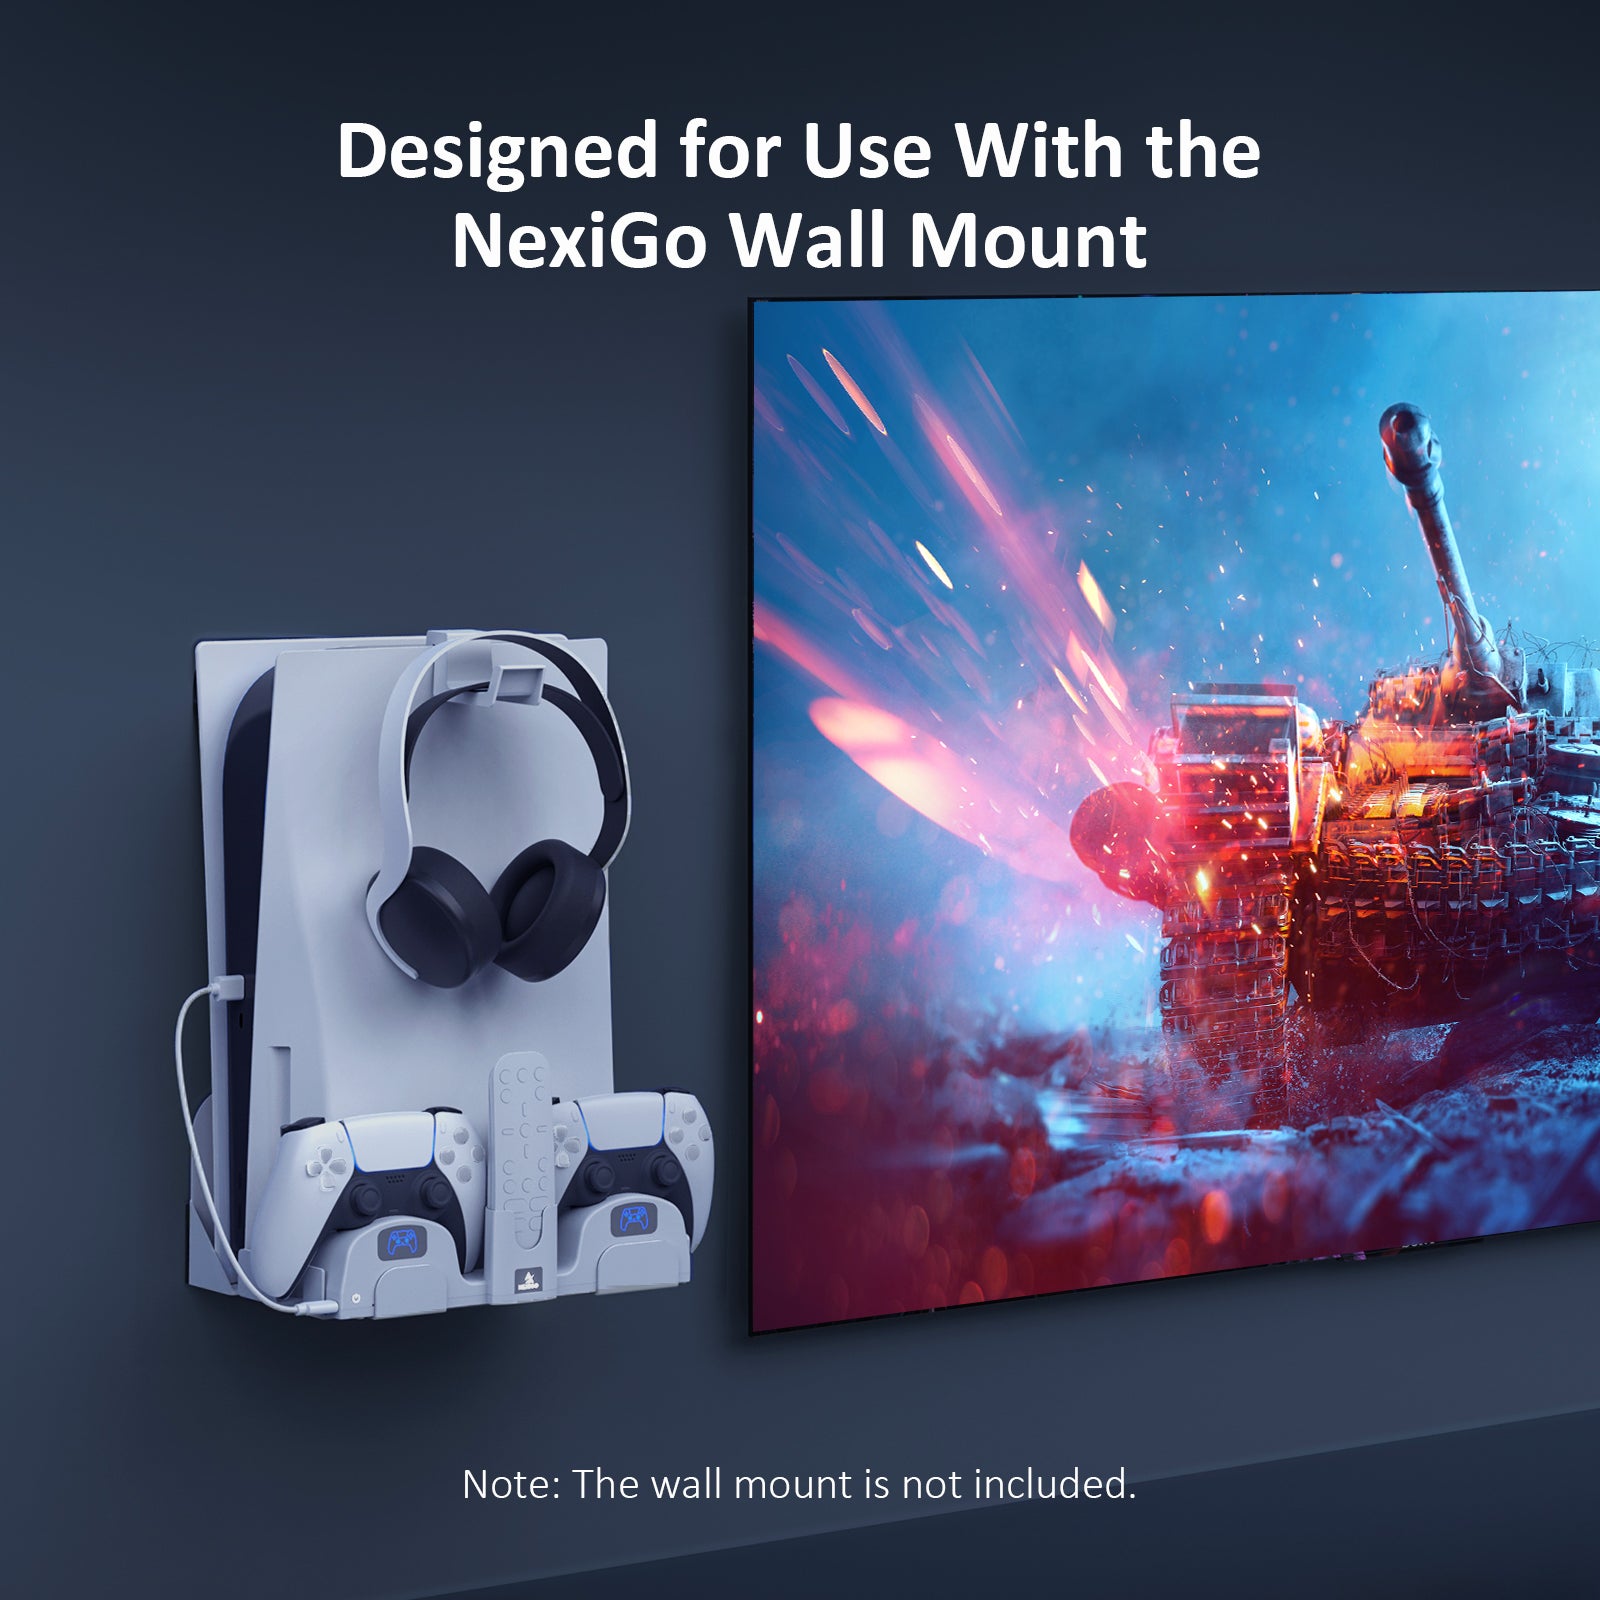 Designed to work with NexiGo wall mount, this dock enables convenient storage and charging of your PS5 controllers on the wall.